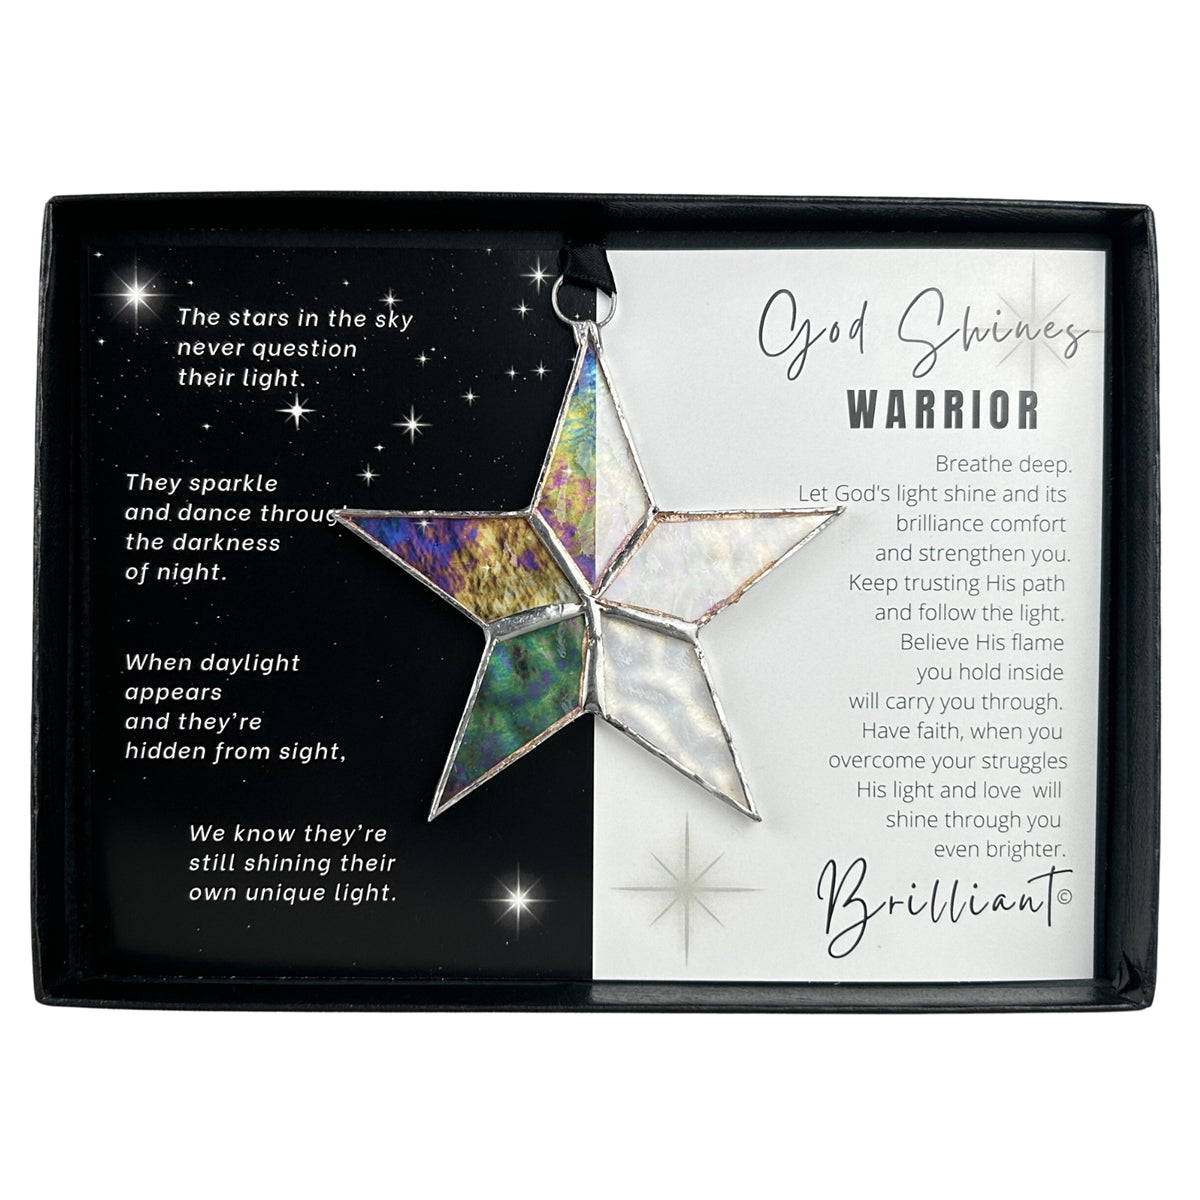 Handmade 4" clear iridescent stained glass star with silver edging, packaged with "God Shines Warrior" sentiment in black gift box with clear lid.